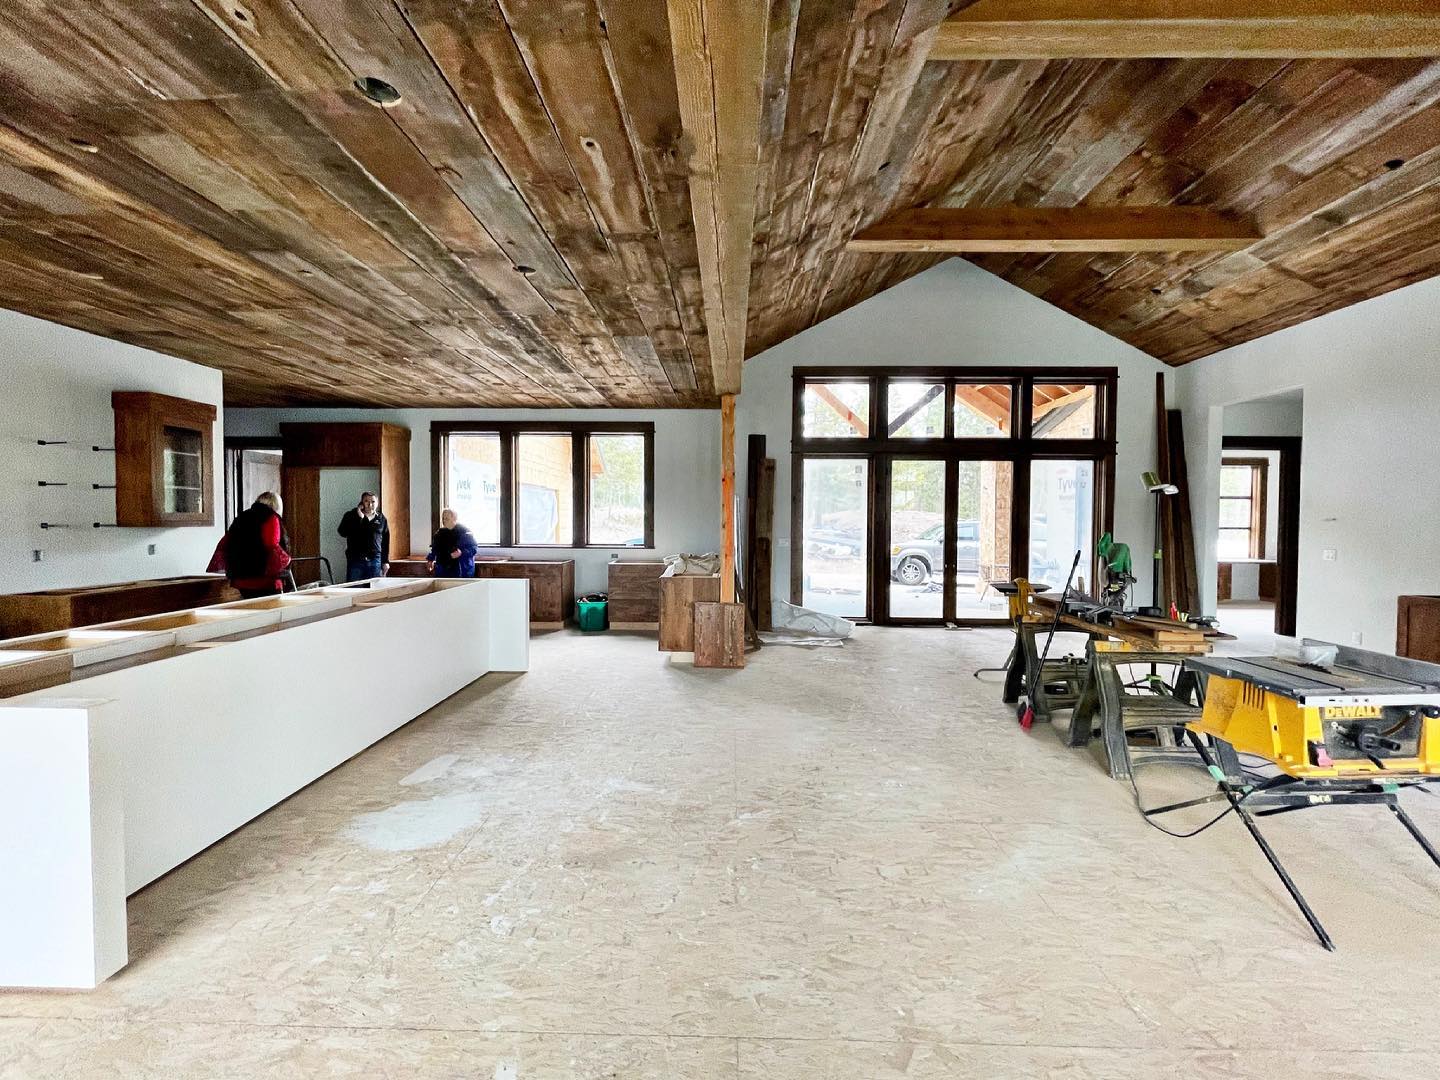 Joe has been working all week to get this barn wood up...it covers the kitchen, dining, and great room, and follows the hallway to the bedroom and mudrooms. It looks amazing! @oldmontanabuilding whitefish custom home builder